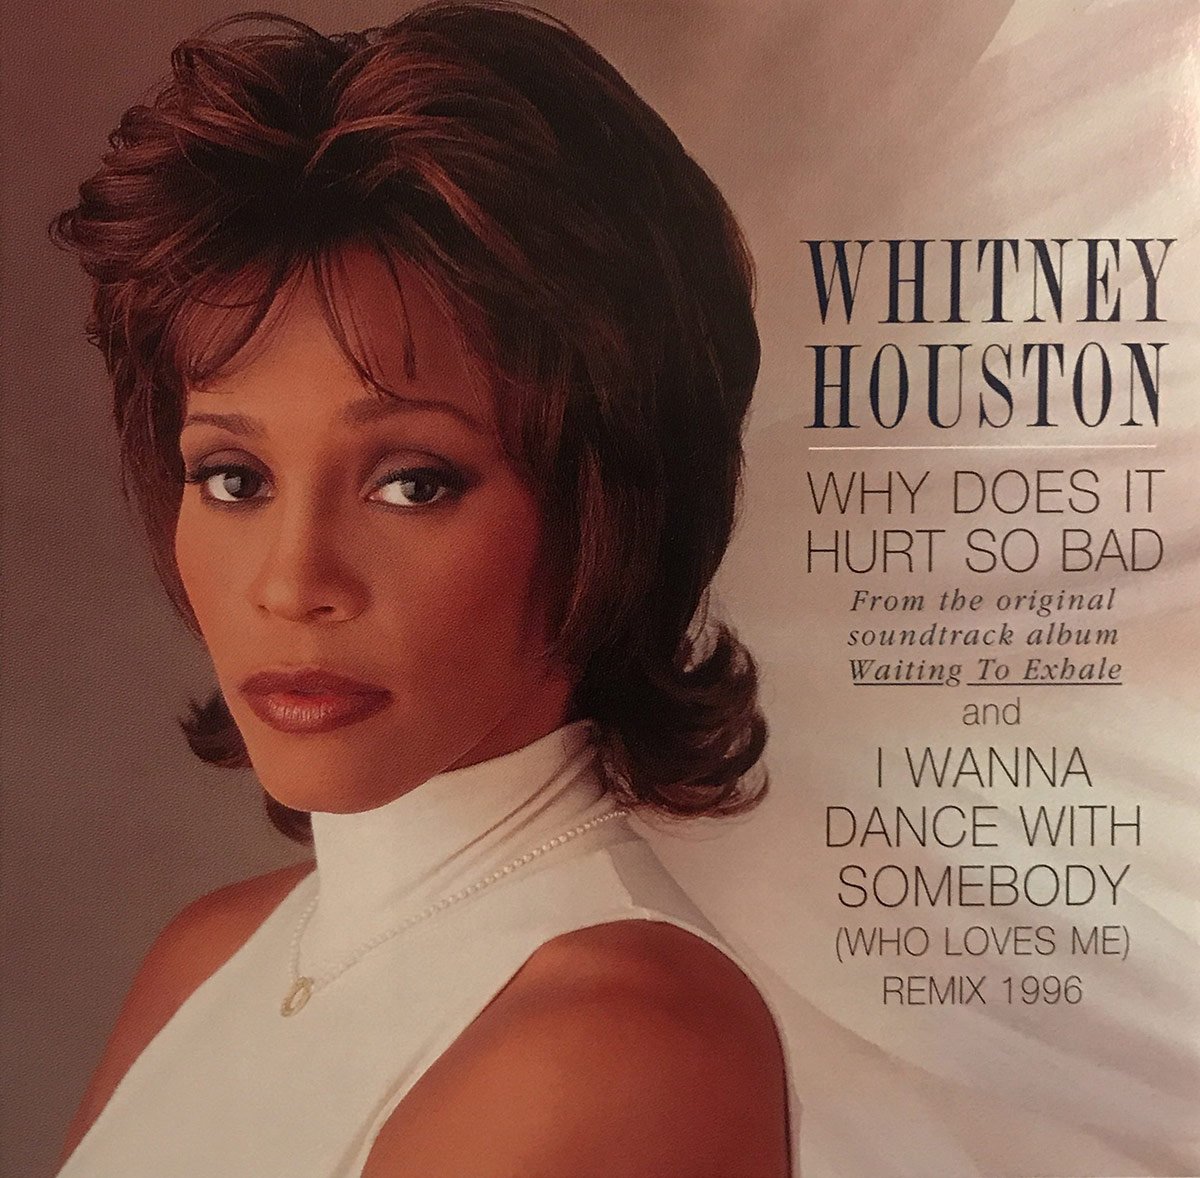 Whitney Houston Why Does It Hurt So Bad cover artwork